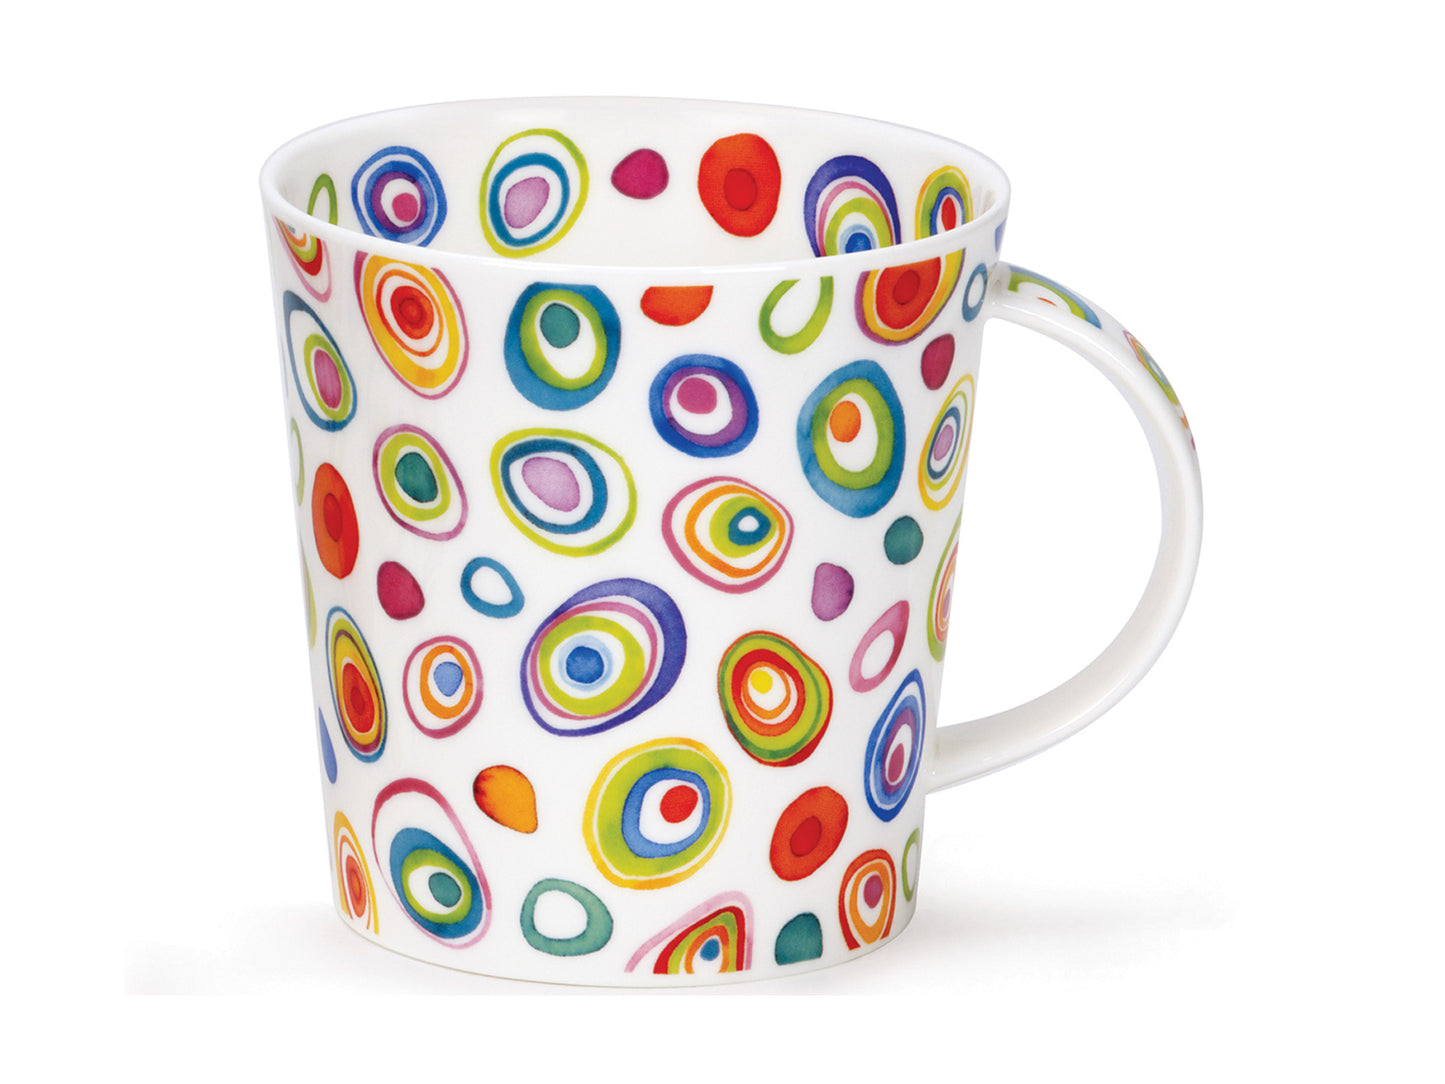 This Dunoon Cairngorm Razzmatazz Mug is made of a fine bone china and is larger in size. It has been designed with oval and ring-shaped masses in multicolours, making it vibrant and cheerful, and this is against a white background.